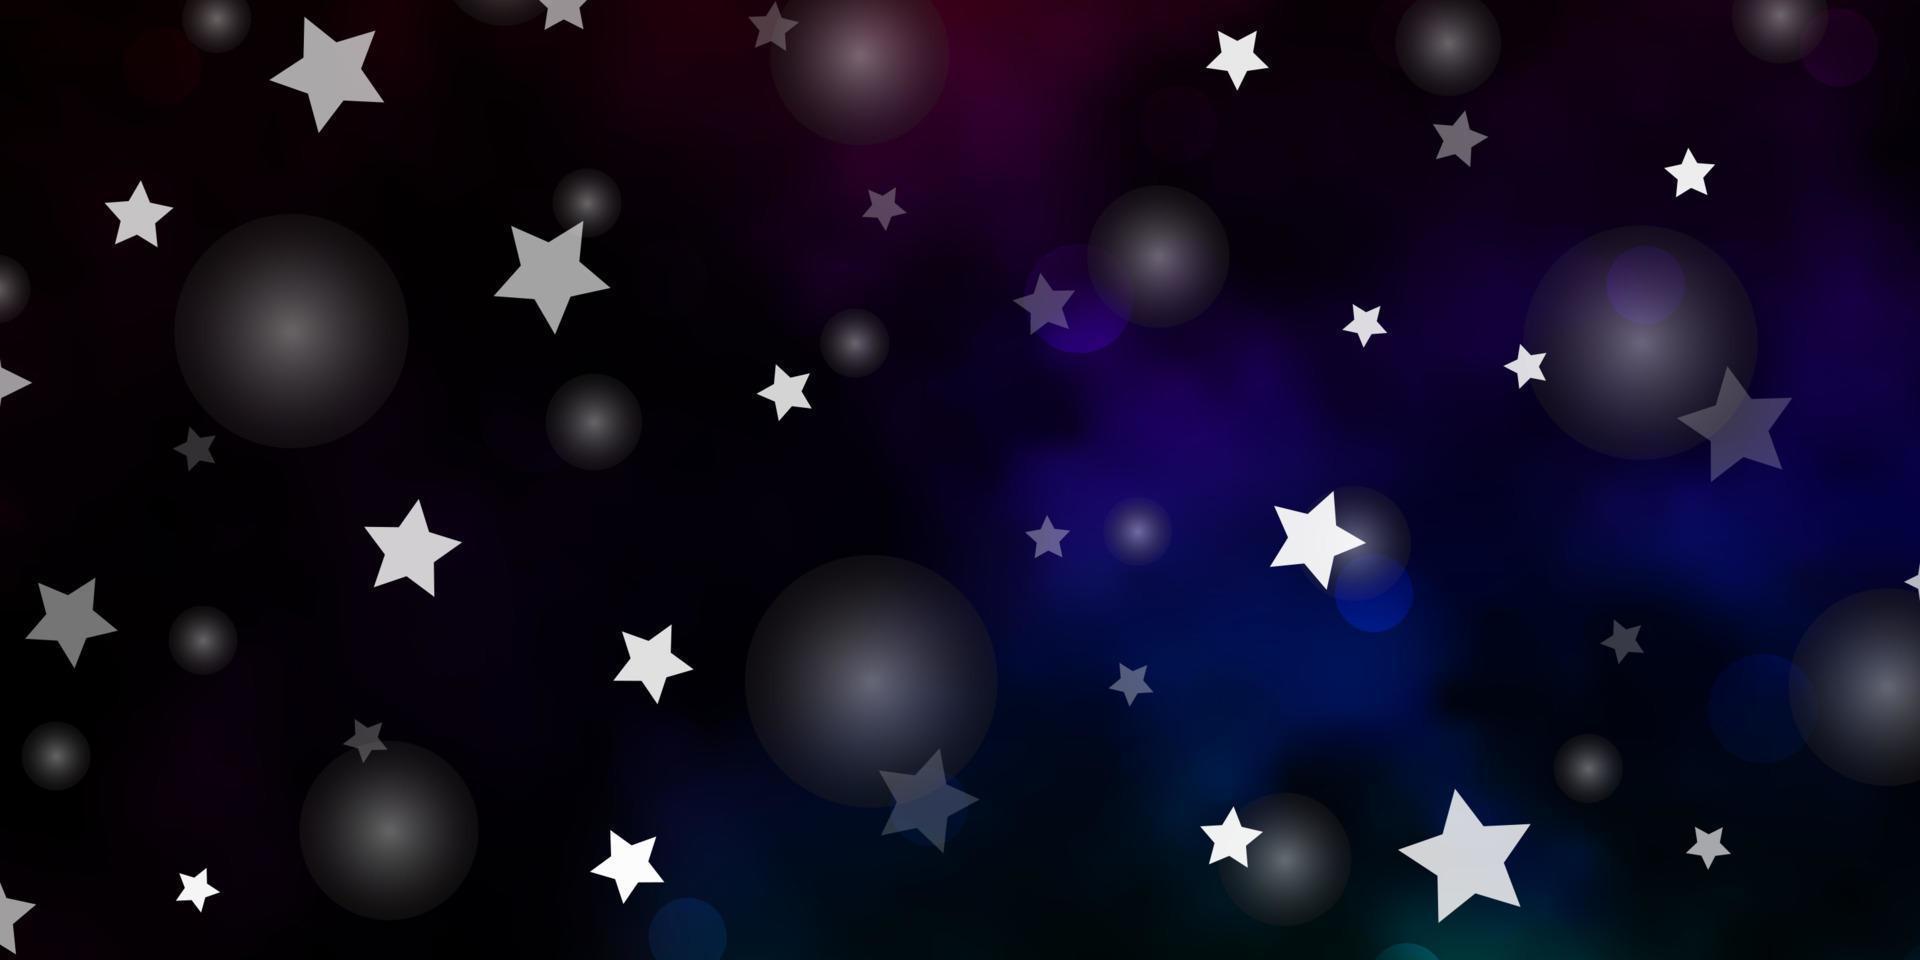 Dark Multicolor vector background with circles, stars.